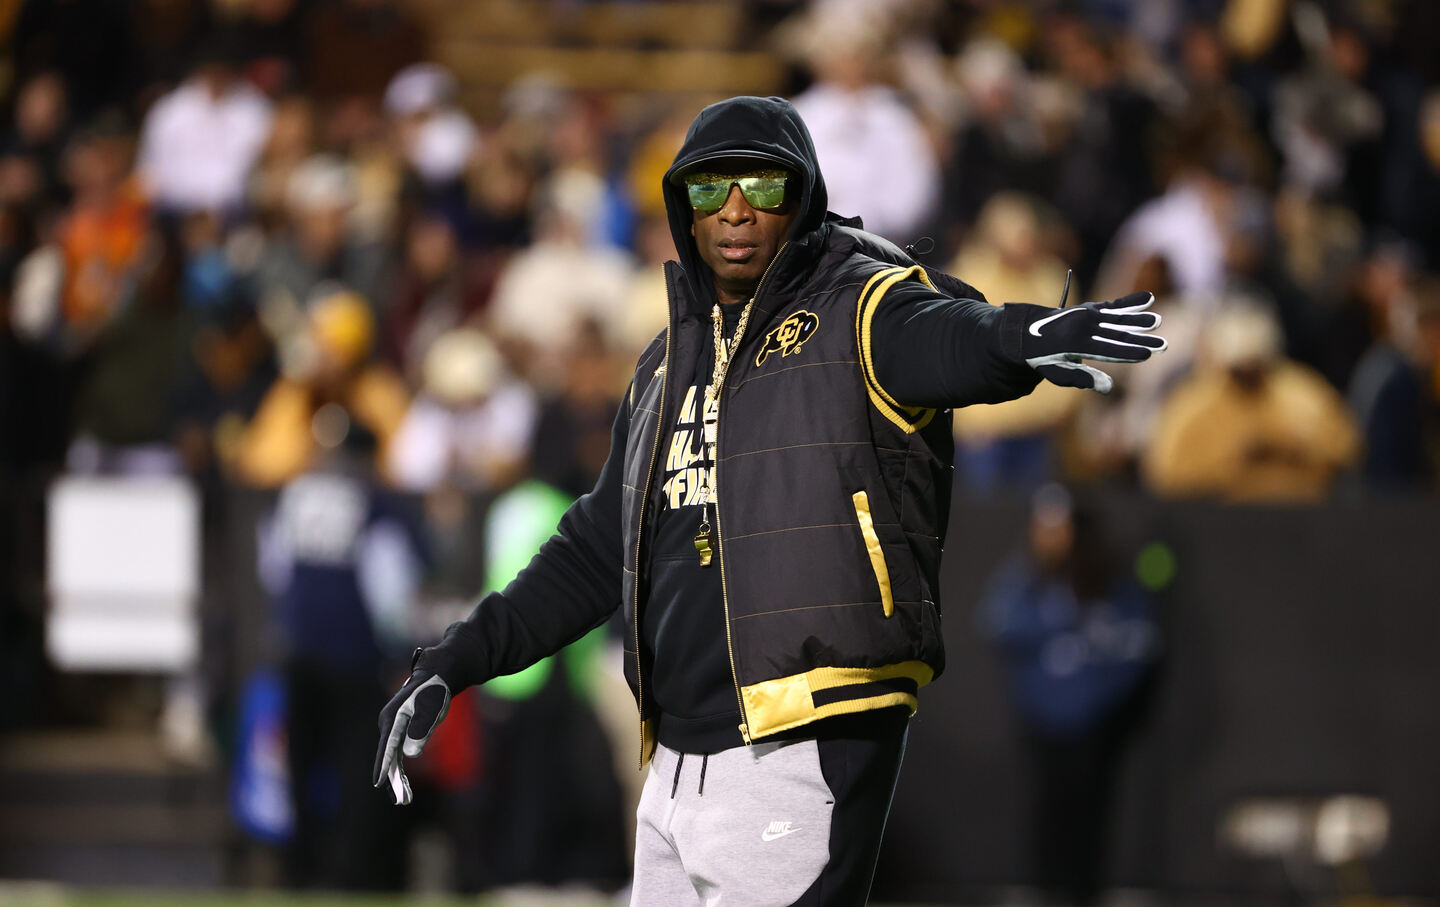 Colorado head coach Deion Sanders looks on prior to game vs Stanford at Folsom Field.